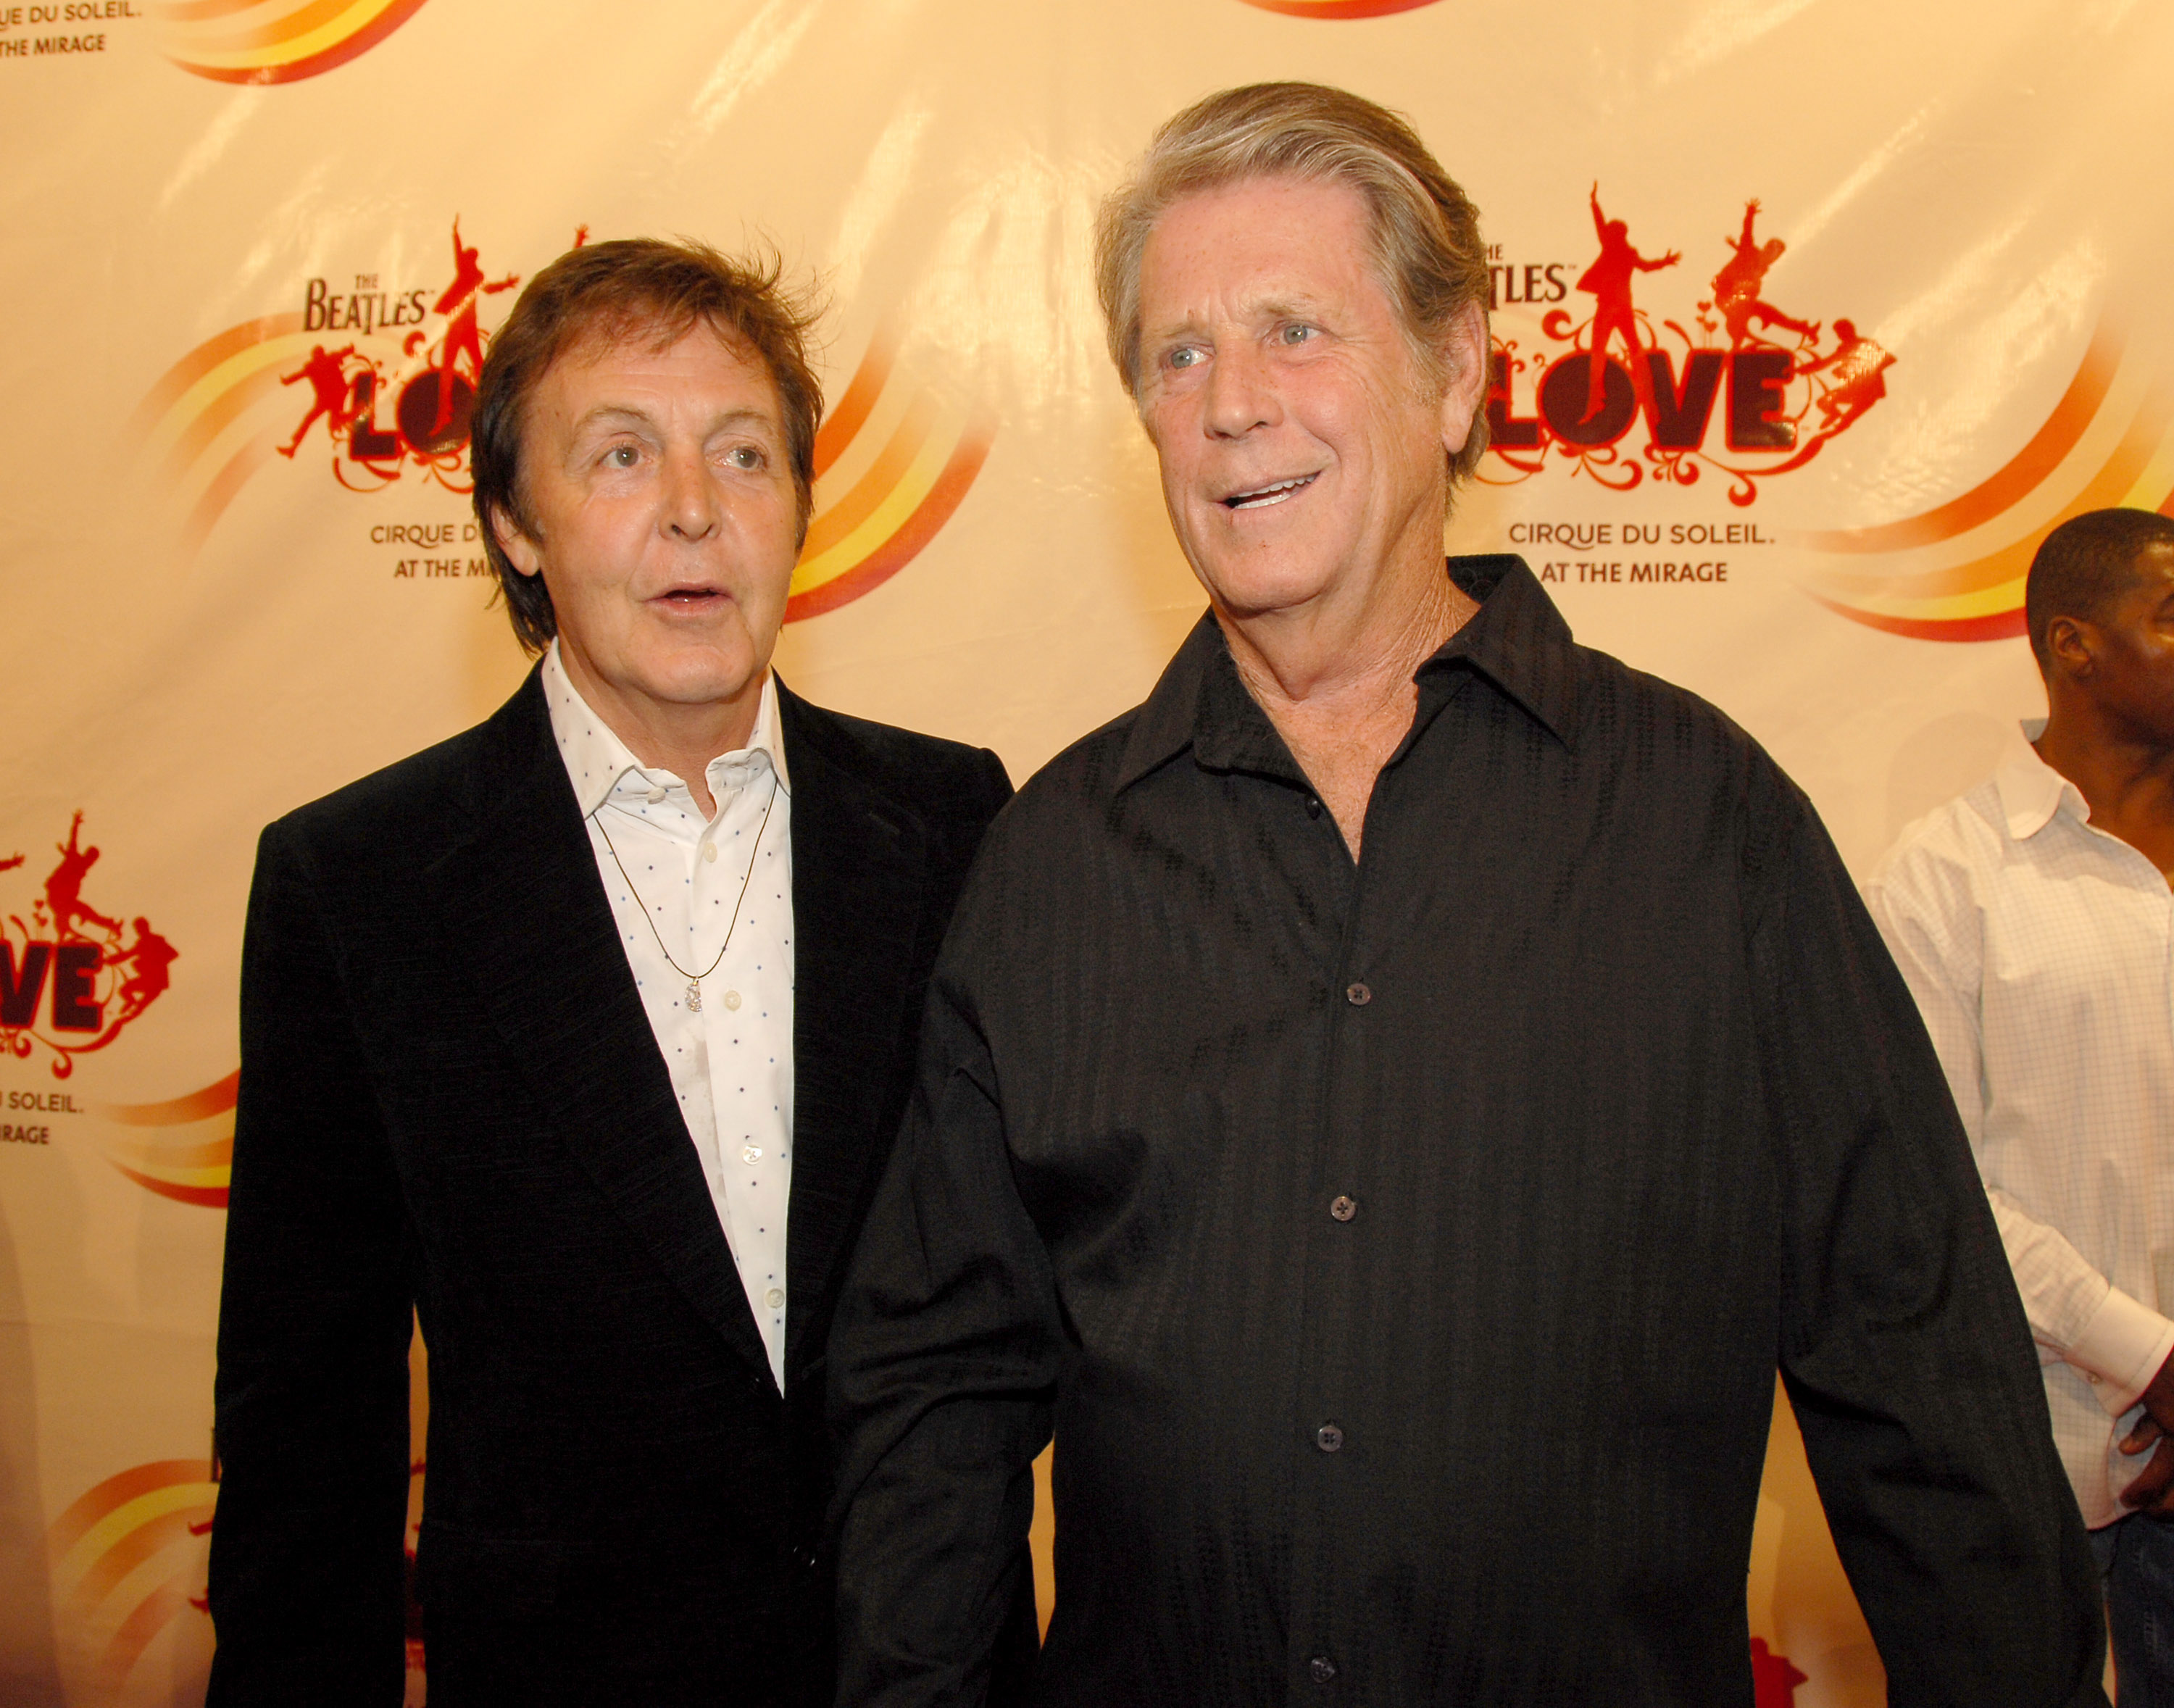 Paul McCartney of The Beatles and Brian Wilson of The Beach Boys at The Mirage Hotel and Casino in Las Vegas, Nevada